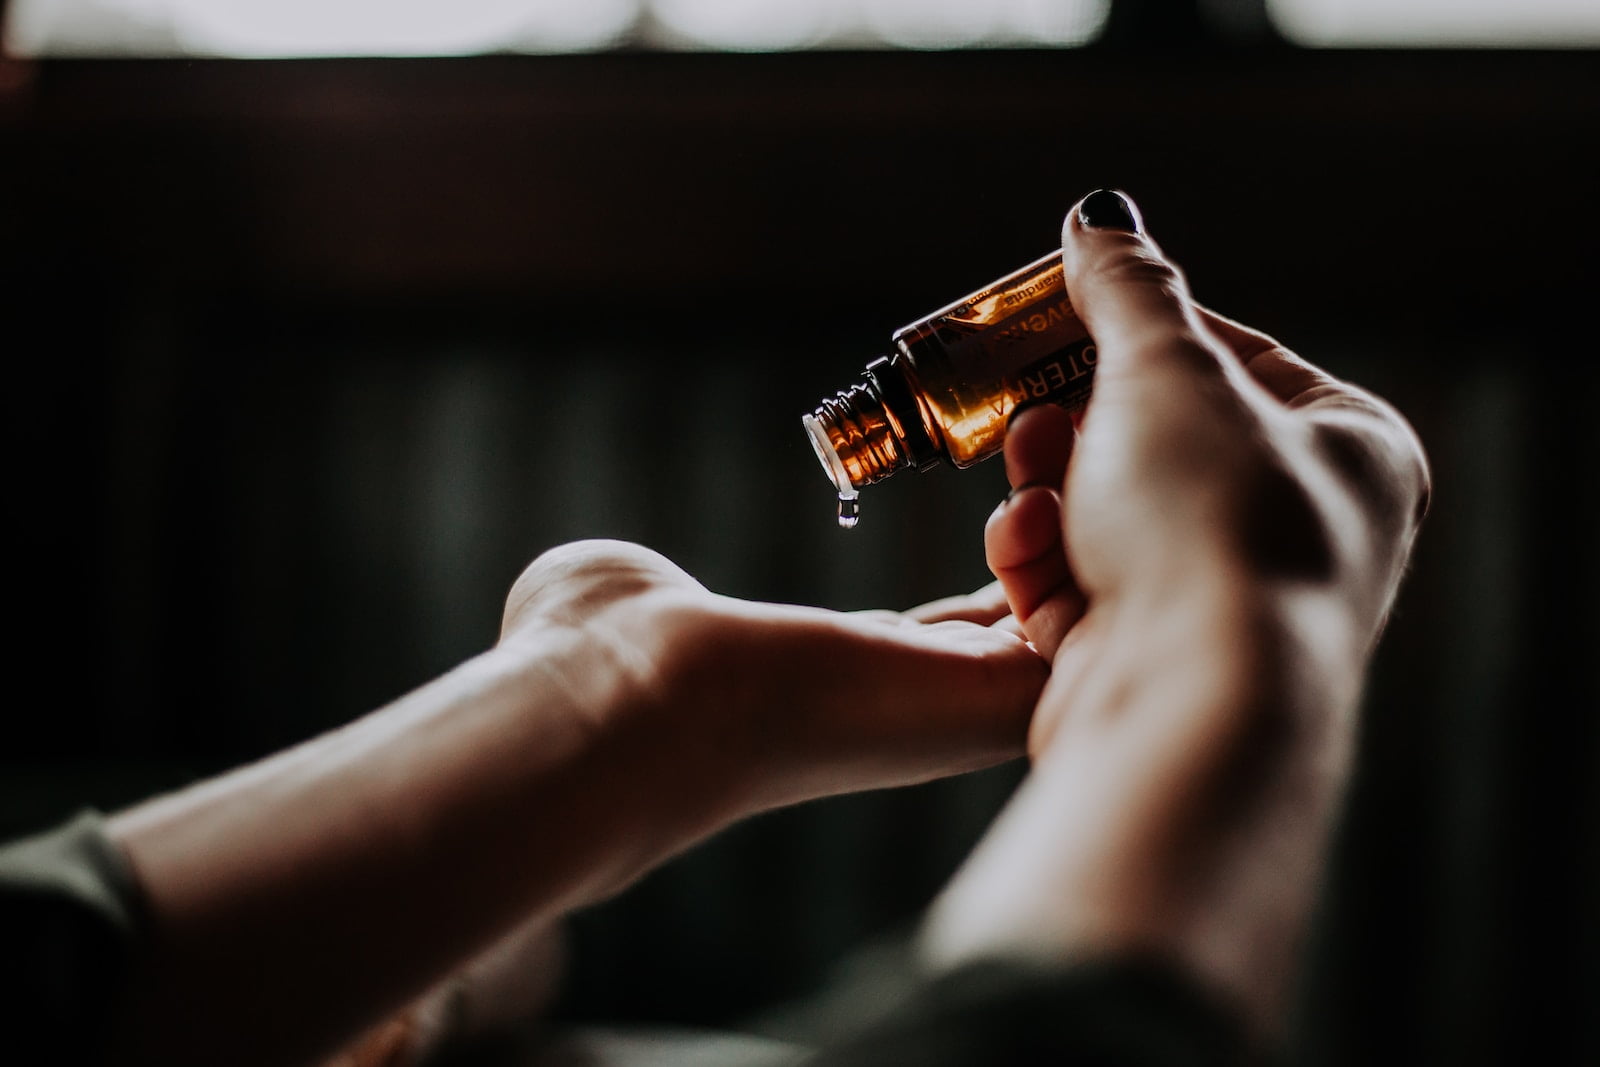 A woman's hand holding an essential oil bottle, offering longevity tips.